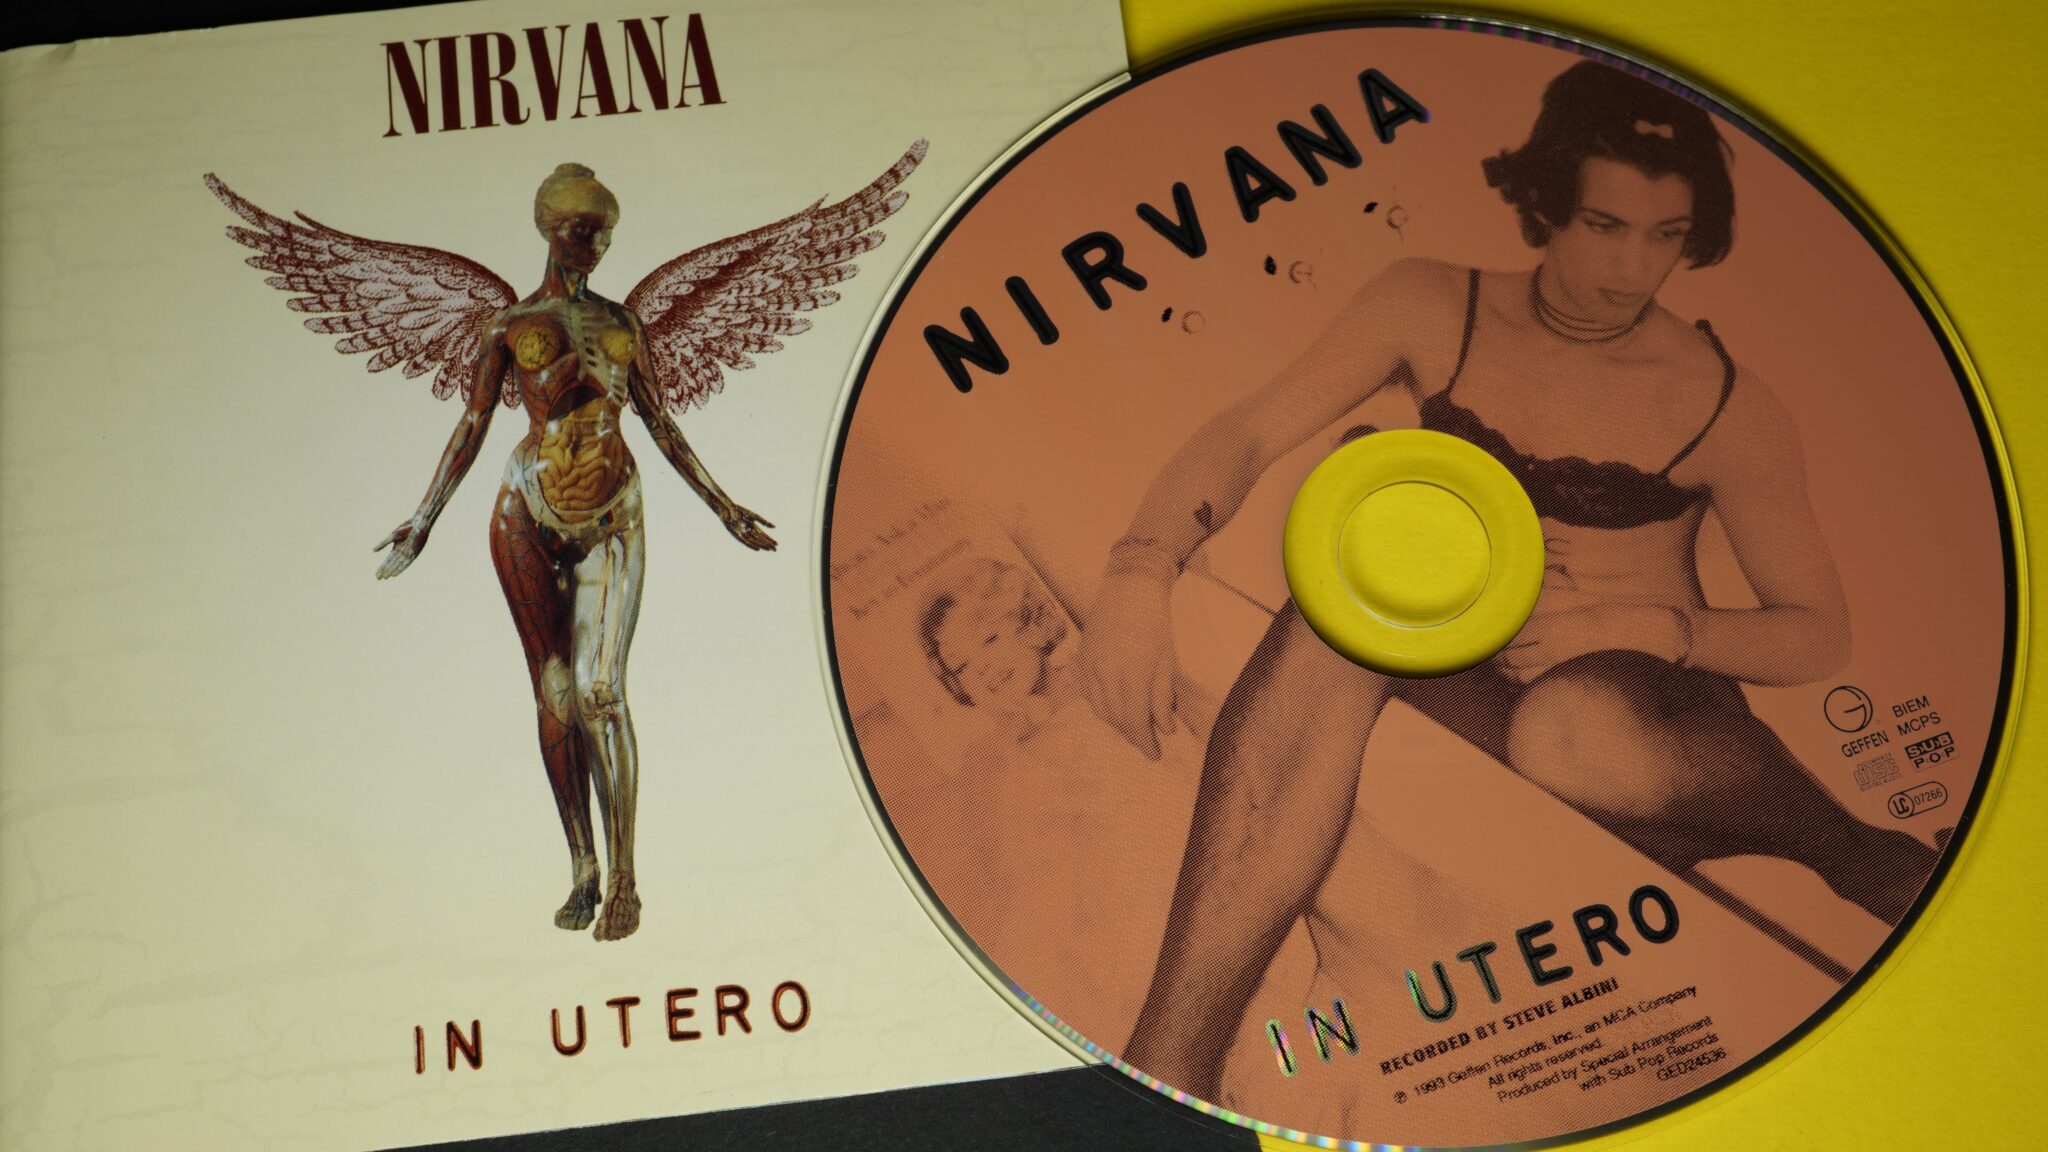 In Utero, a Steve Albini produced and engineered album